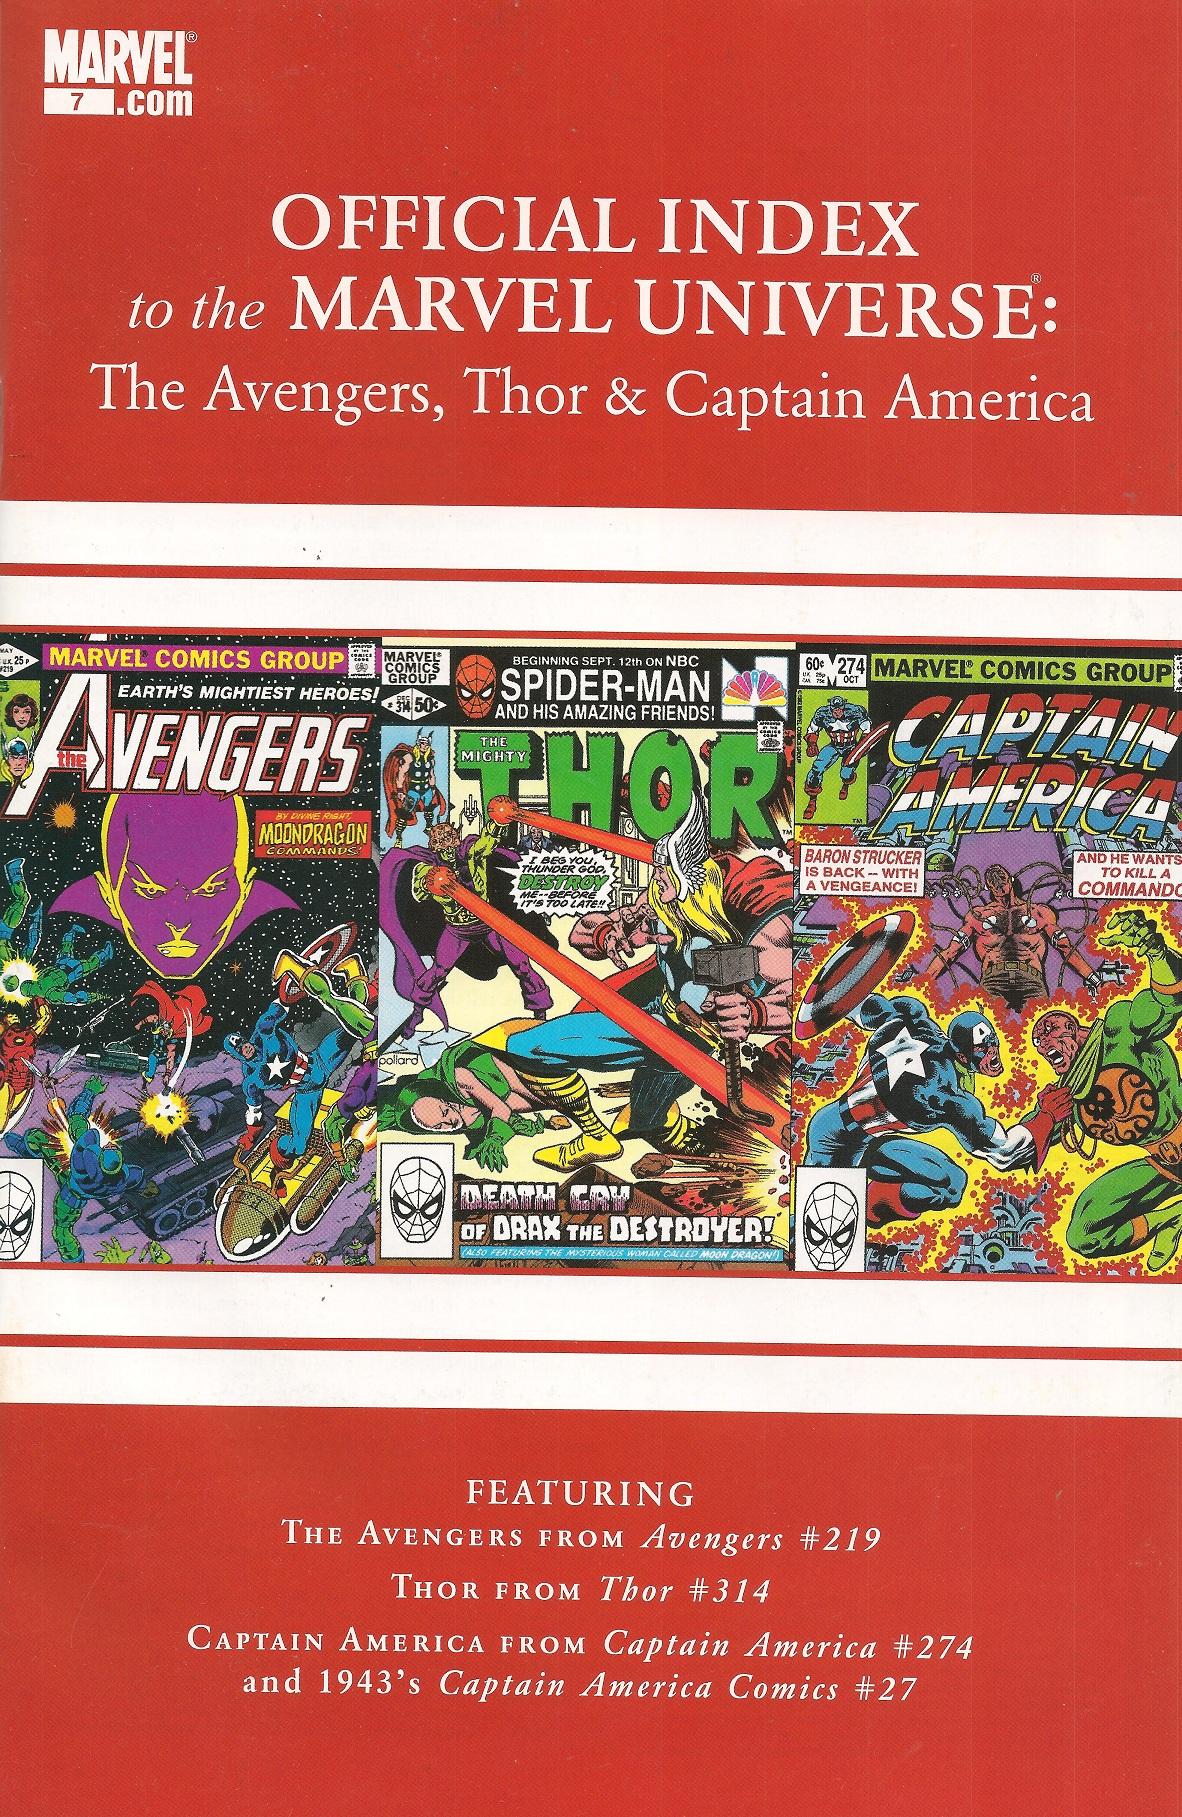 Avengers, Thor & Captain America: Official Index to the Marvel Universe Vol. 1 #7